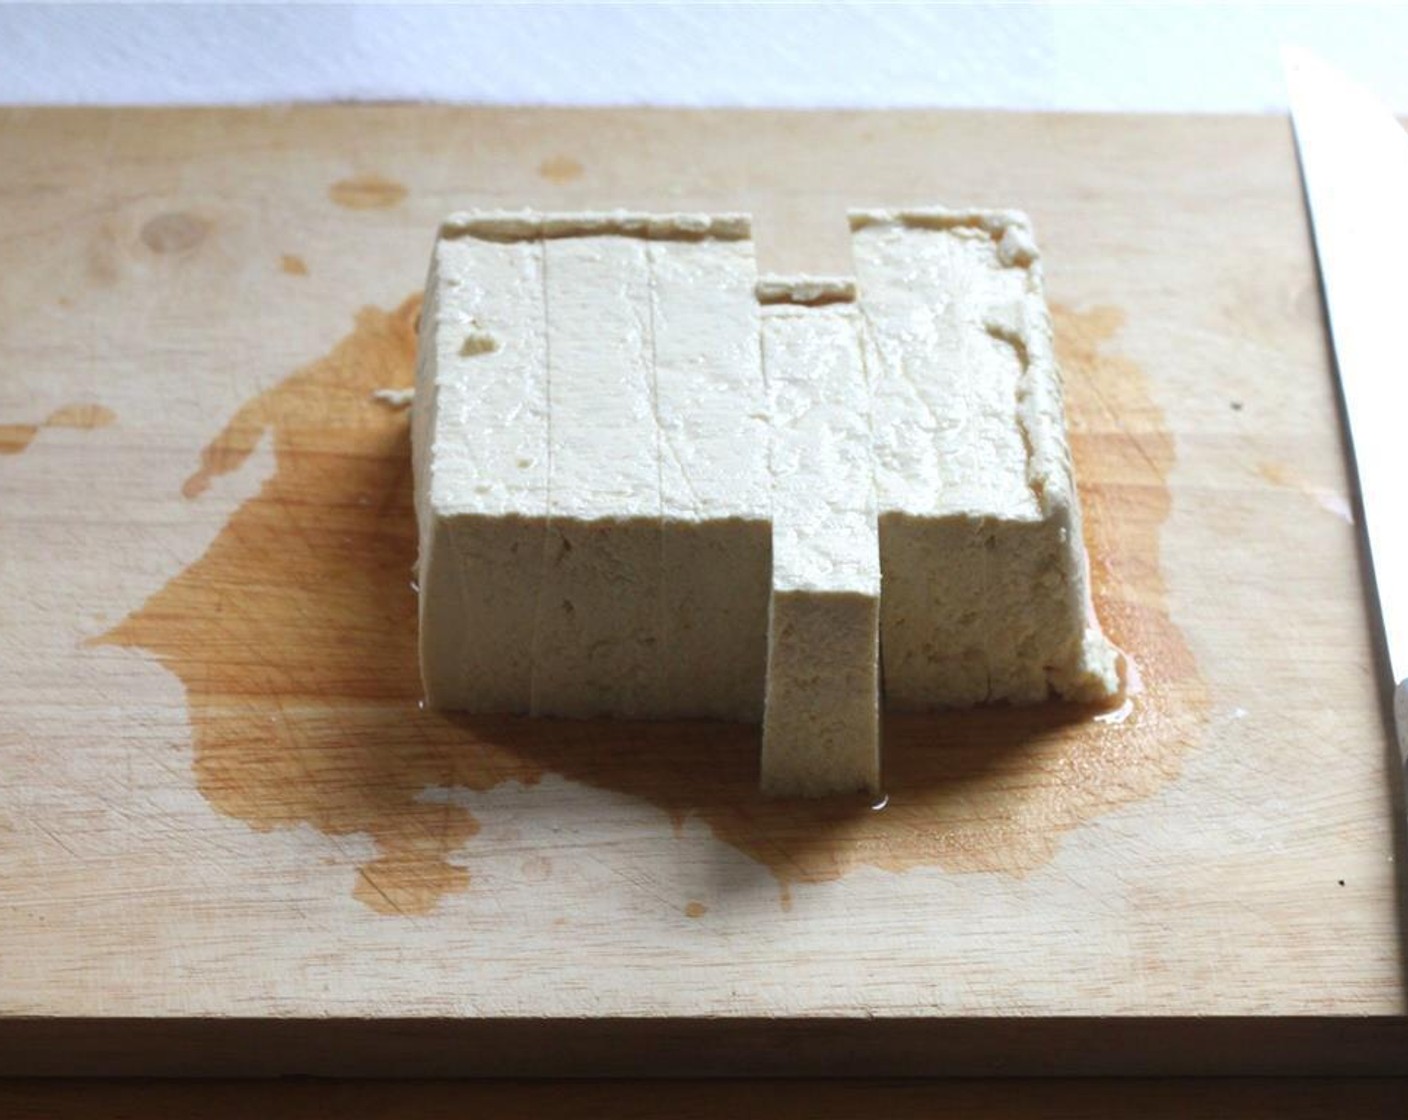 step 1 Start by slicing the Extra Firm Tofu (1 pckg) into six slabs, and pressing gently between a few sheets of paper towels. Let them sit between the paper towel for about 10 minutes to drain excess water.